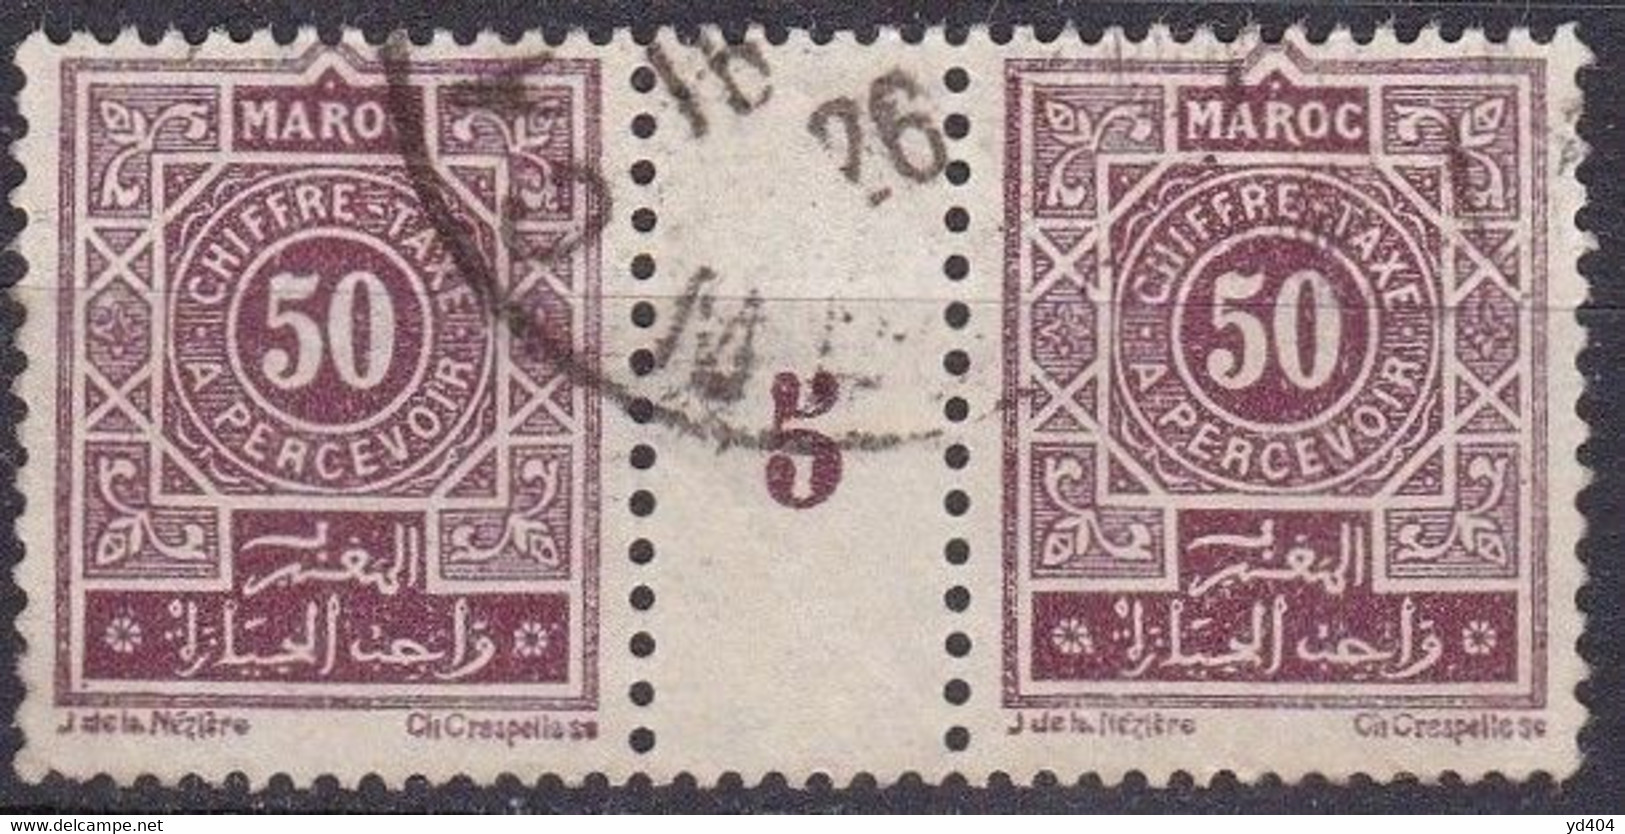 CF-MA-50 – FR.COL. – MOROCCO – MILLESIMES - POSTAGE DUE – 1925 – Y&T # 32 USED 24 € - Timbres-taxe